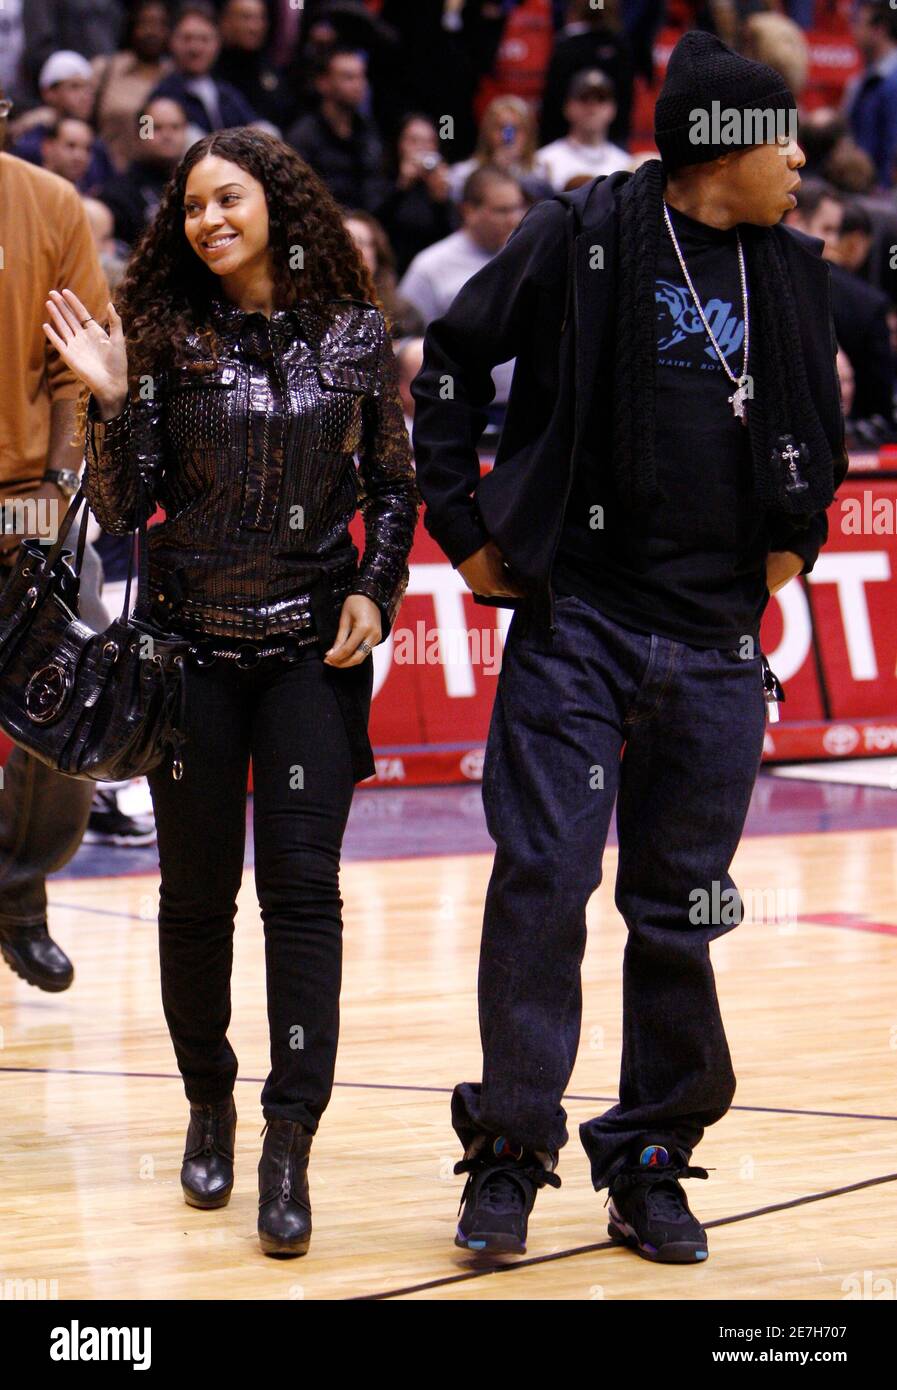 Beyonce Knowles leaves the court with companion Jay-Z after the New Jersey  Nets beat the Cleveland Cavaliers during the NBA basketball game in East  Rutherford, New Jersey, December 14, 2007. REUTERS/Ray Stubblebine (